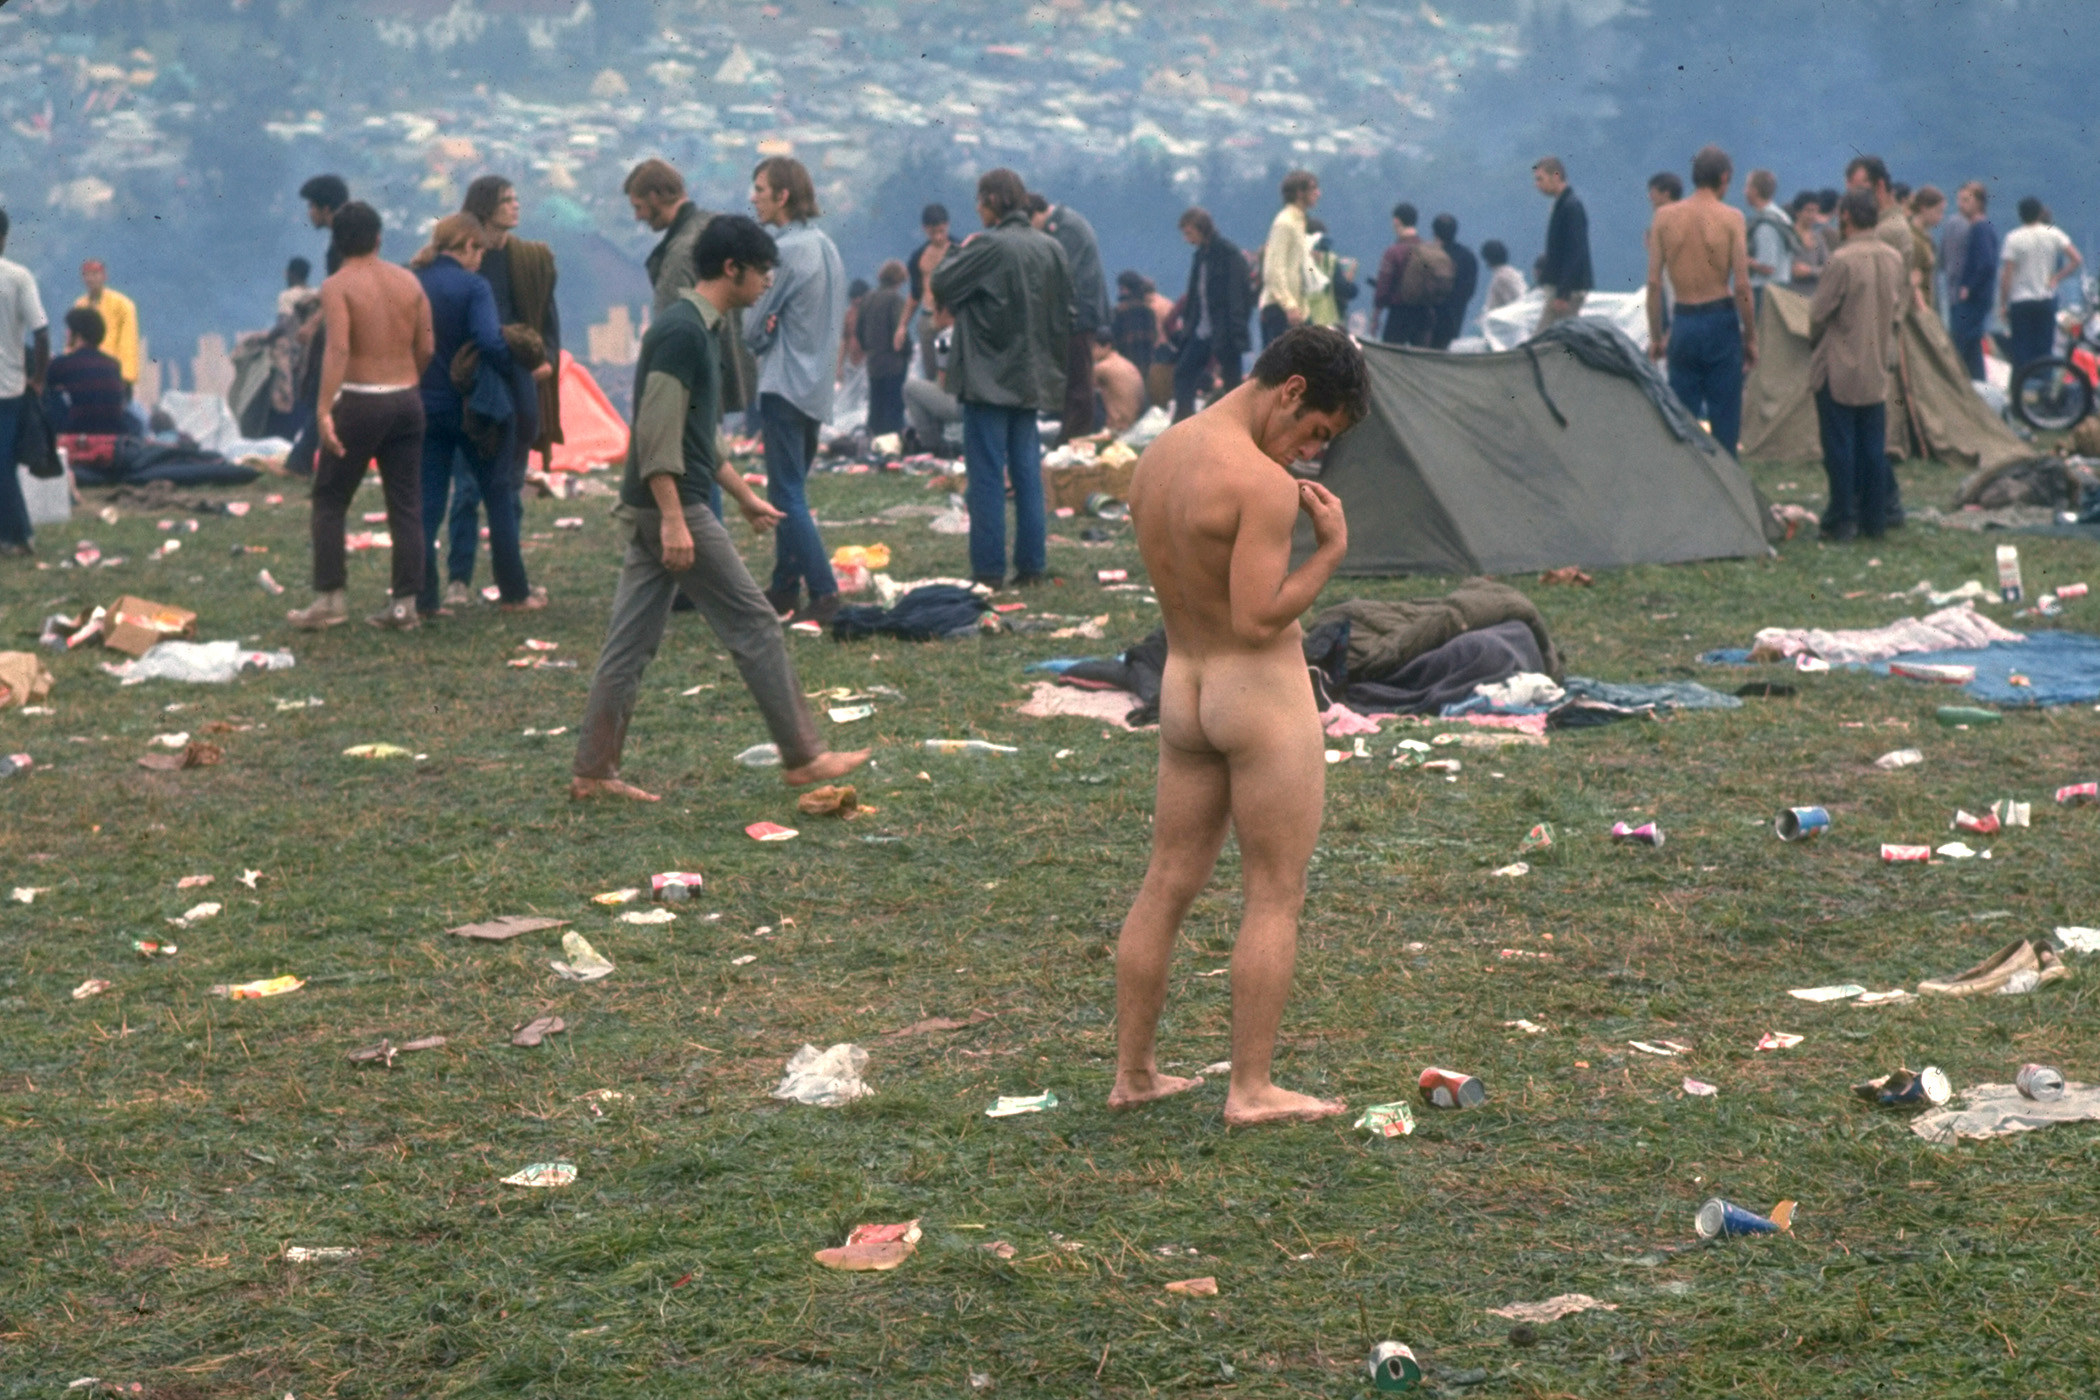 Naked people at woodstock